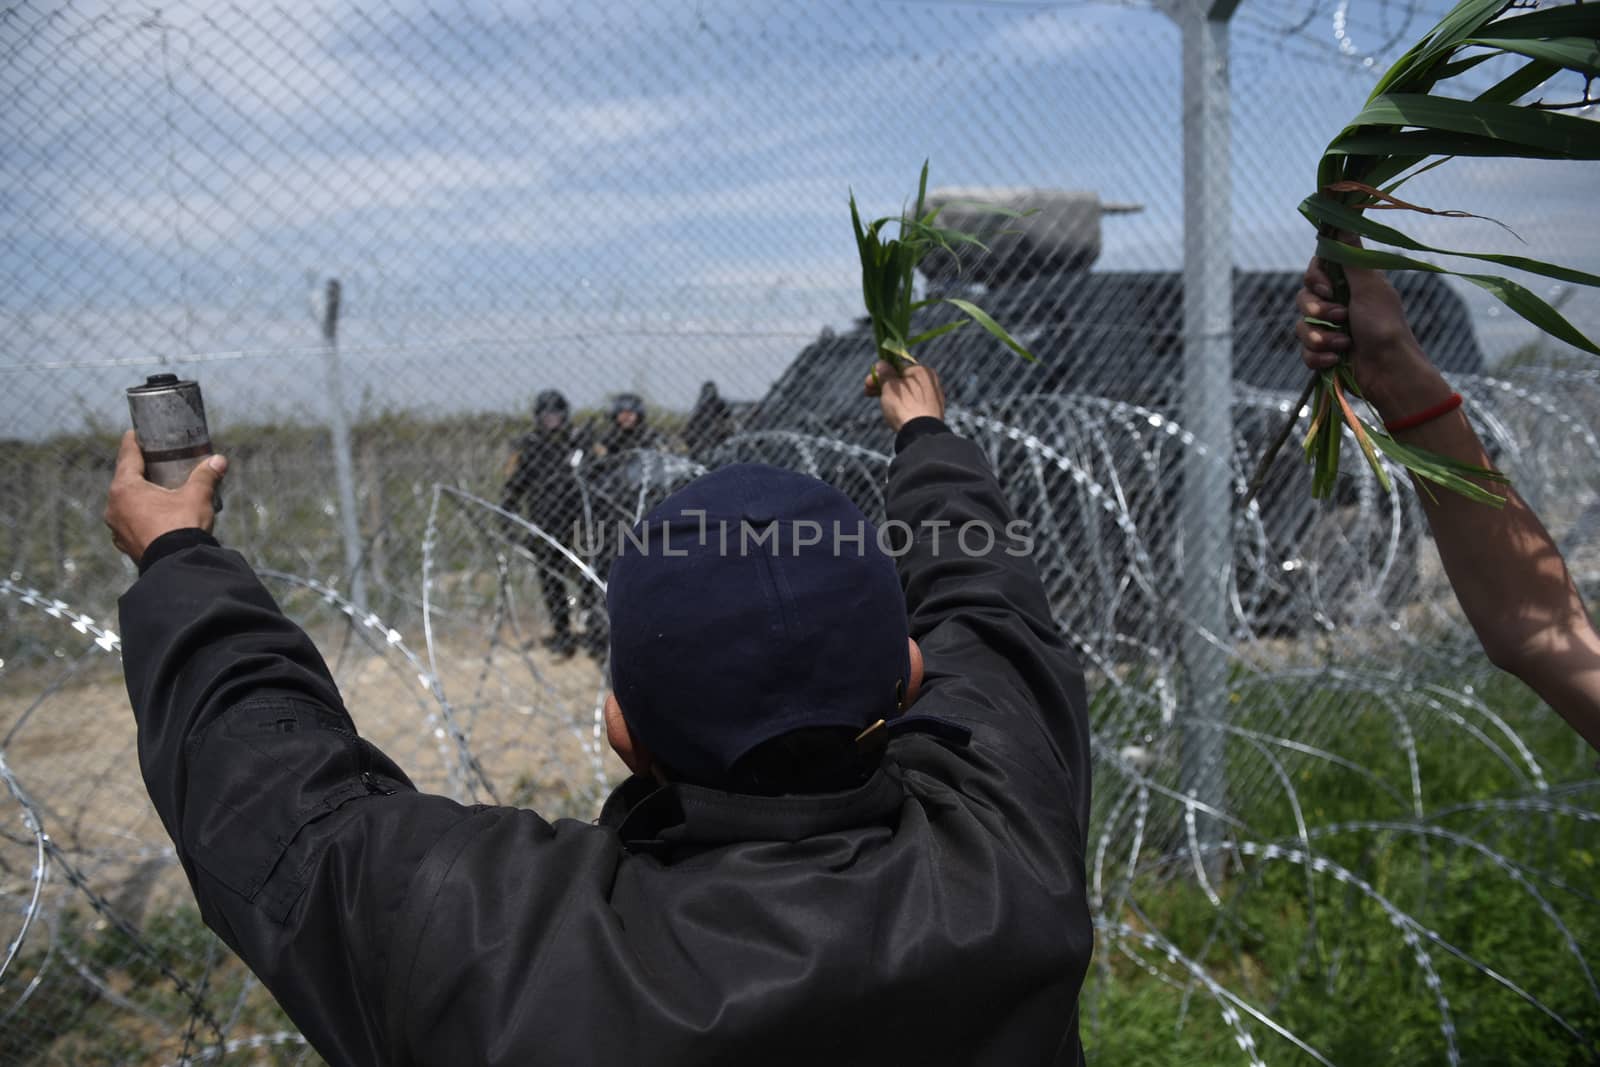 GREECE, Idomeni: A refugee holds up a used tear gas canister and leaves to Macedonian authorities near the Macedonia-Greek border on April 11, 2016 a day after clashes between the two groups.Hundreds of migrants were injured on Sunday as they attempted to cross the border into Macedonia. Police used tear gas, water cannons, and stun grenades to disperse the crowd as migrants threw stones in retaliation. 